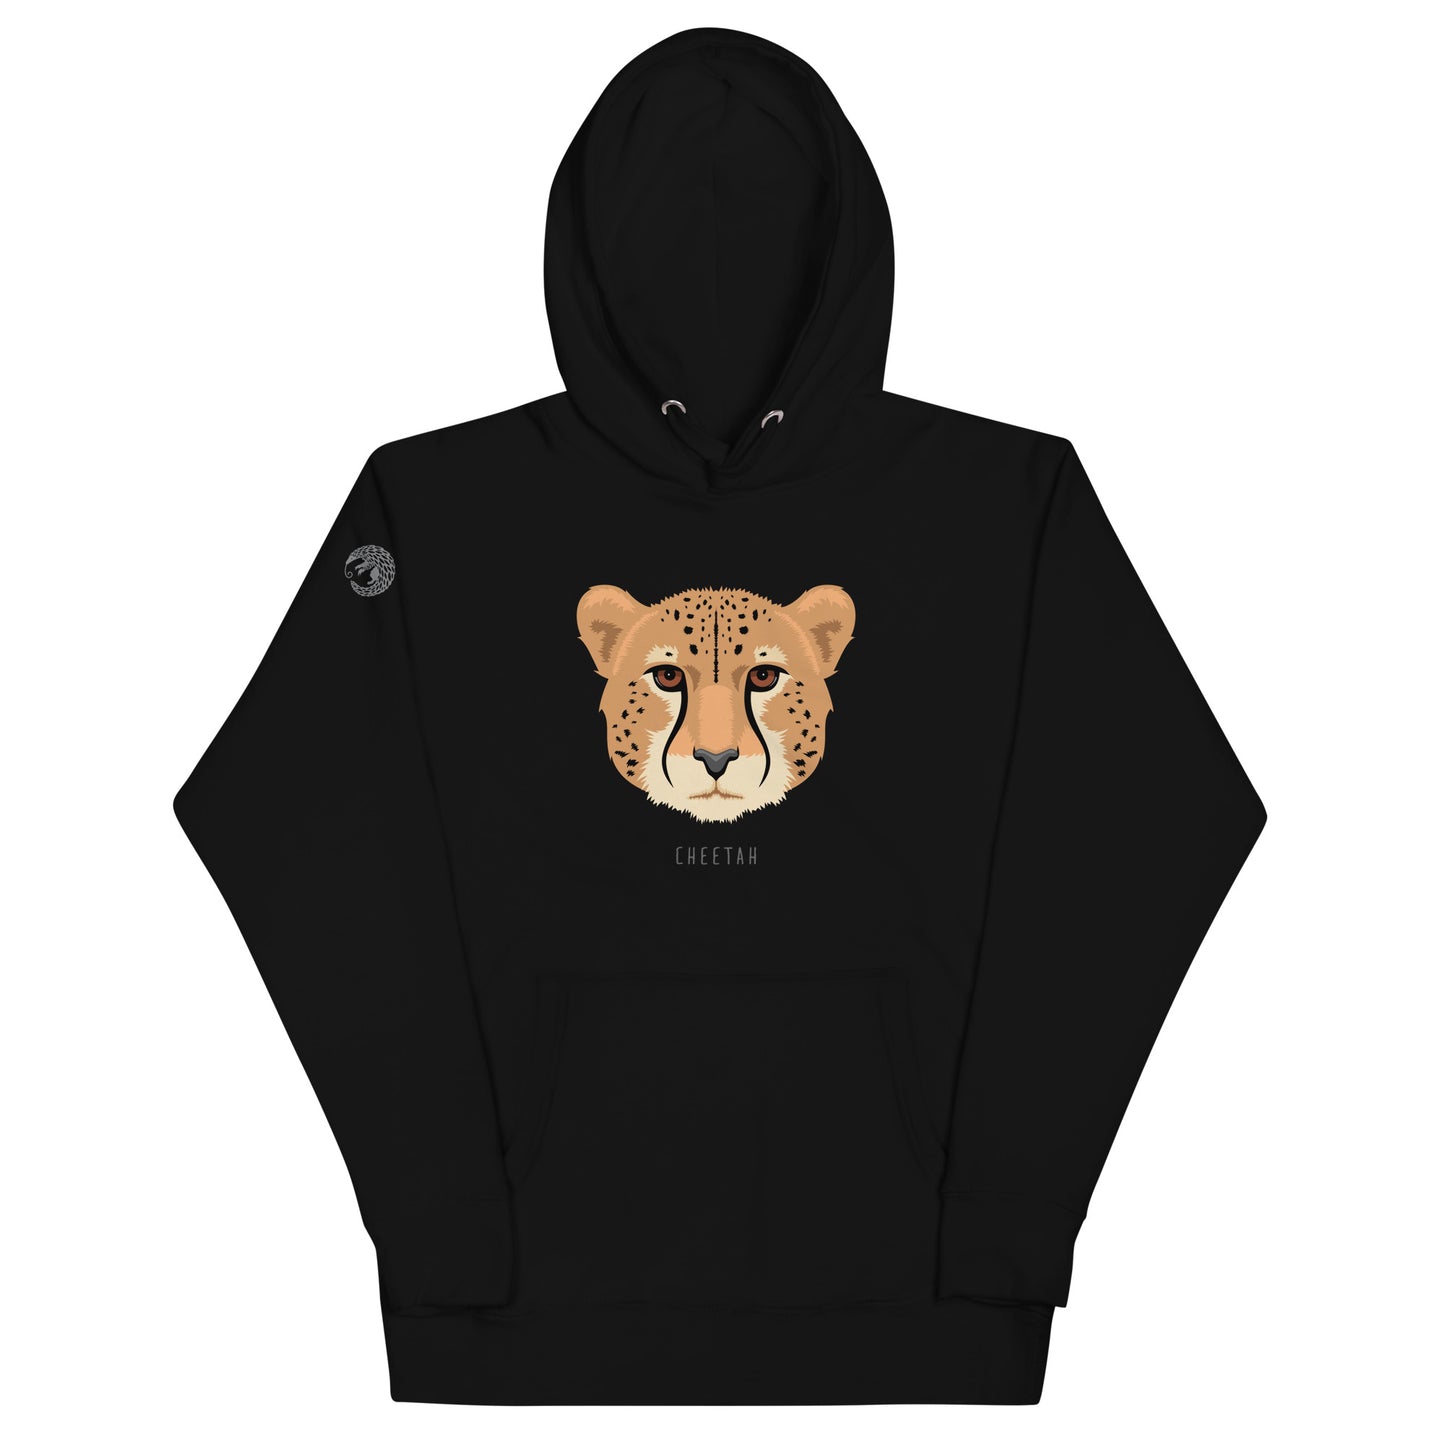 A black, hooded, pullover sweatshirt with an illustration of a cheetah's face and thew world "cheetah" beneath it. 